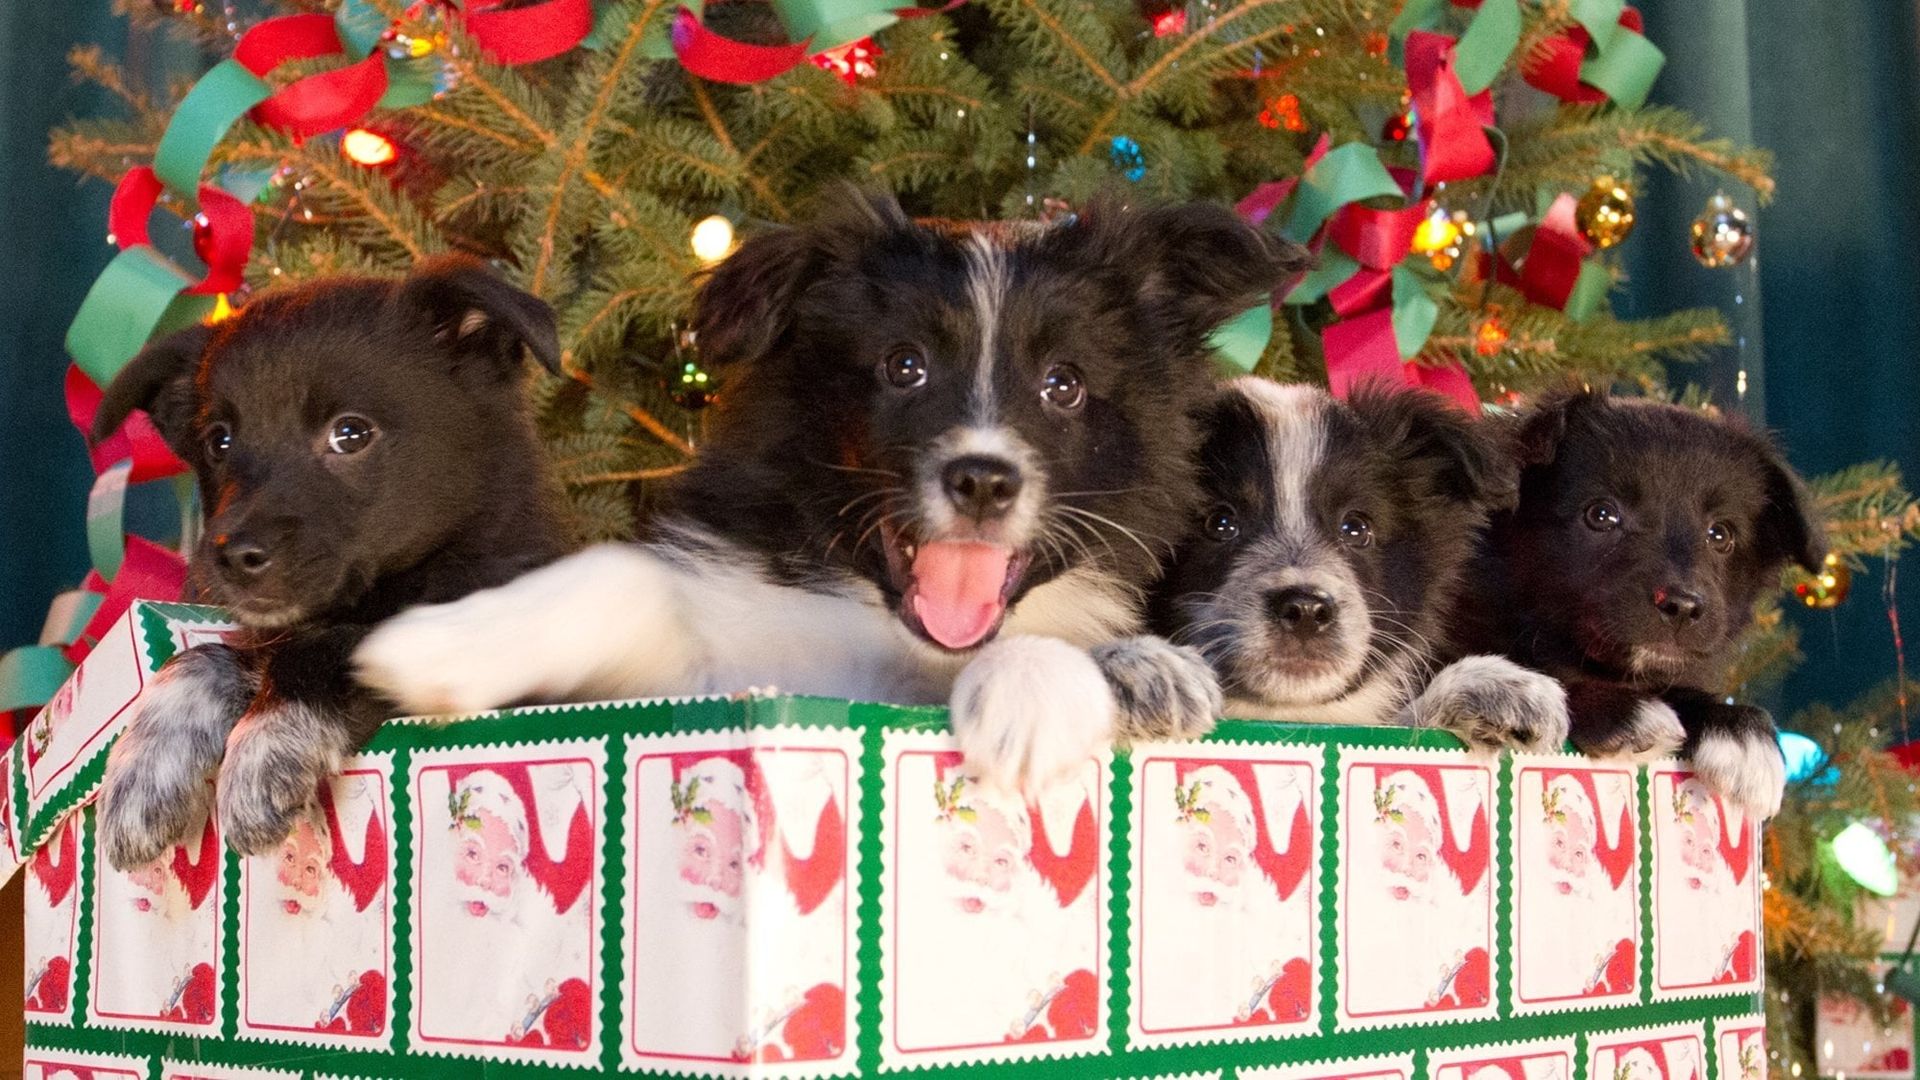 12 Dogs of Christmas: Great Puppy Rescue background